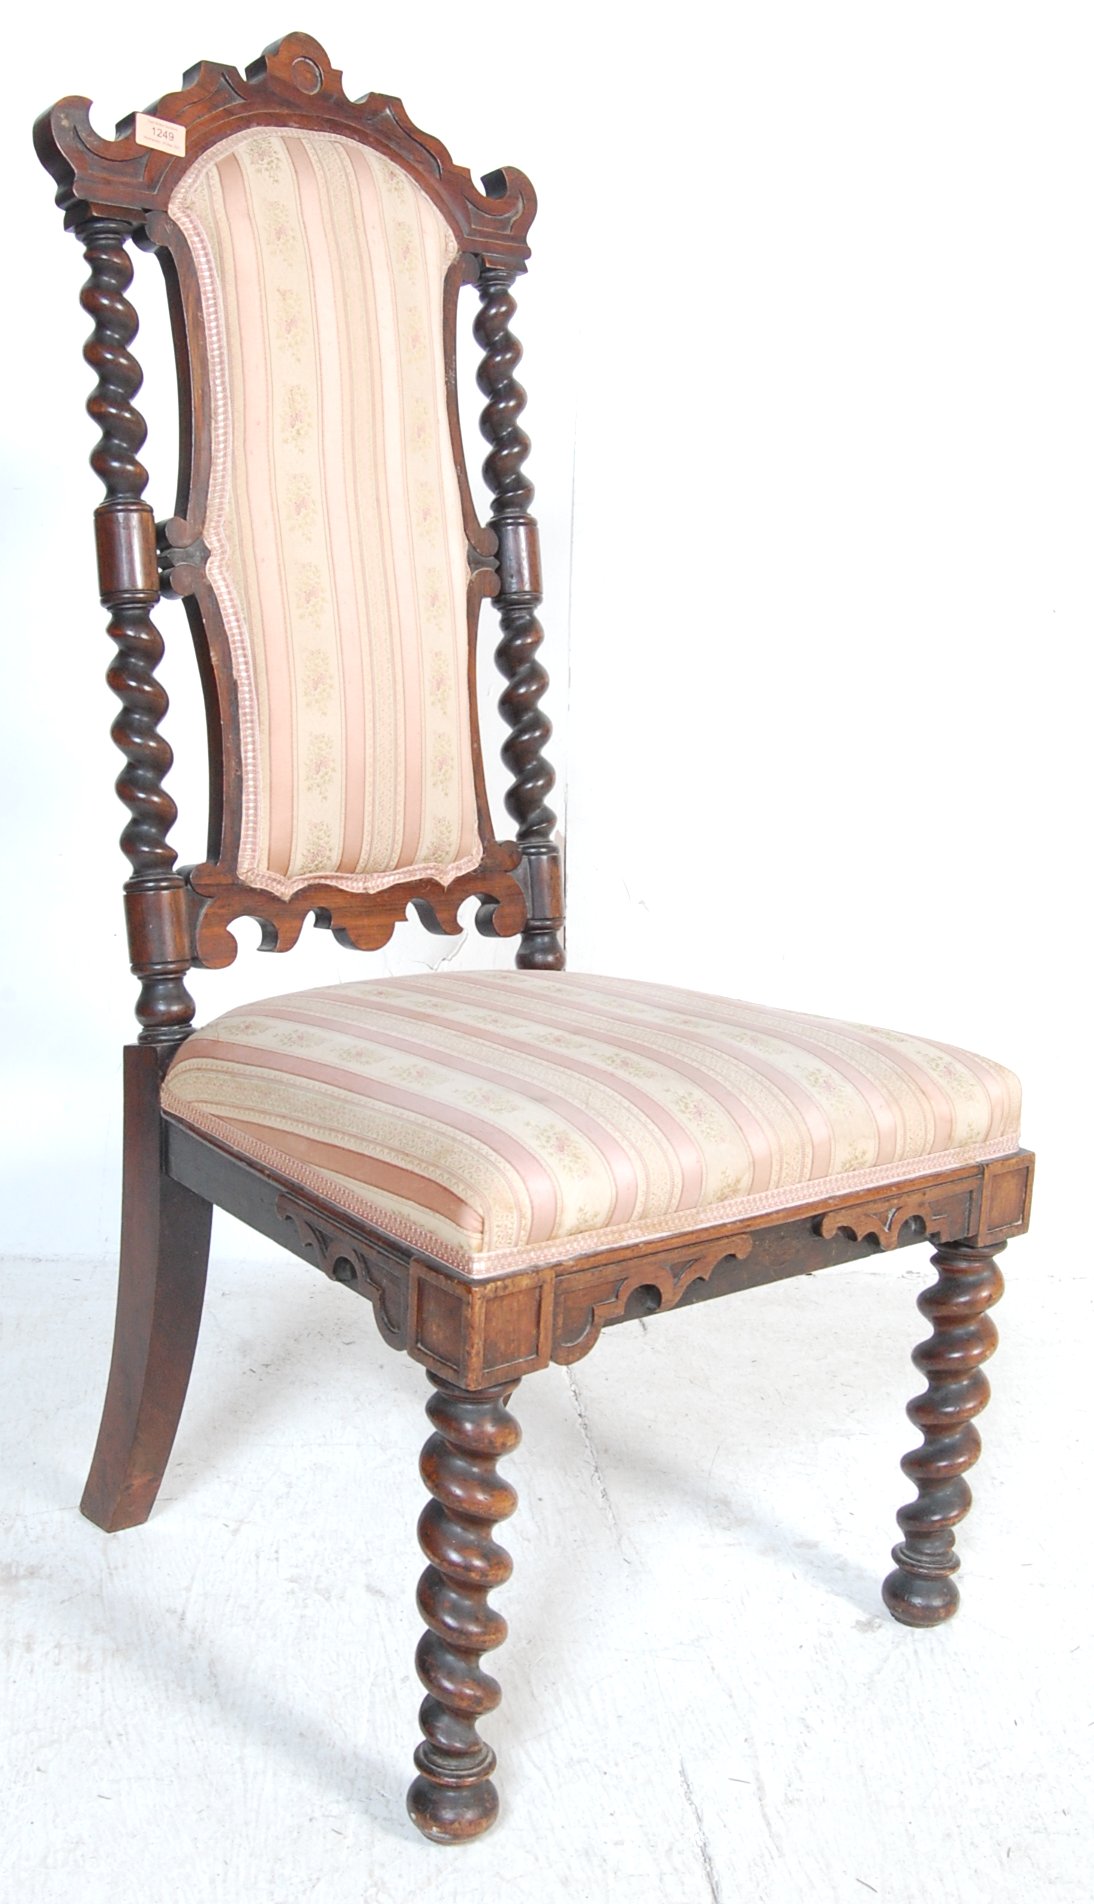 19TH CENTURY VICTORIAN ANTIQUE ROSEWOOD BEDROOM CHAIR